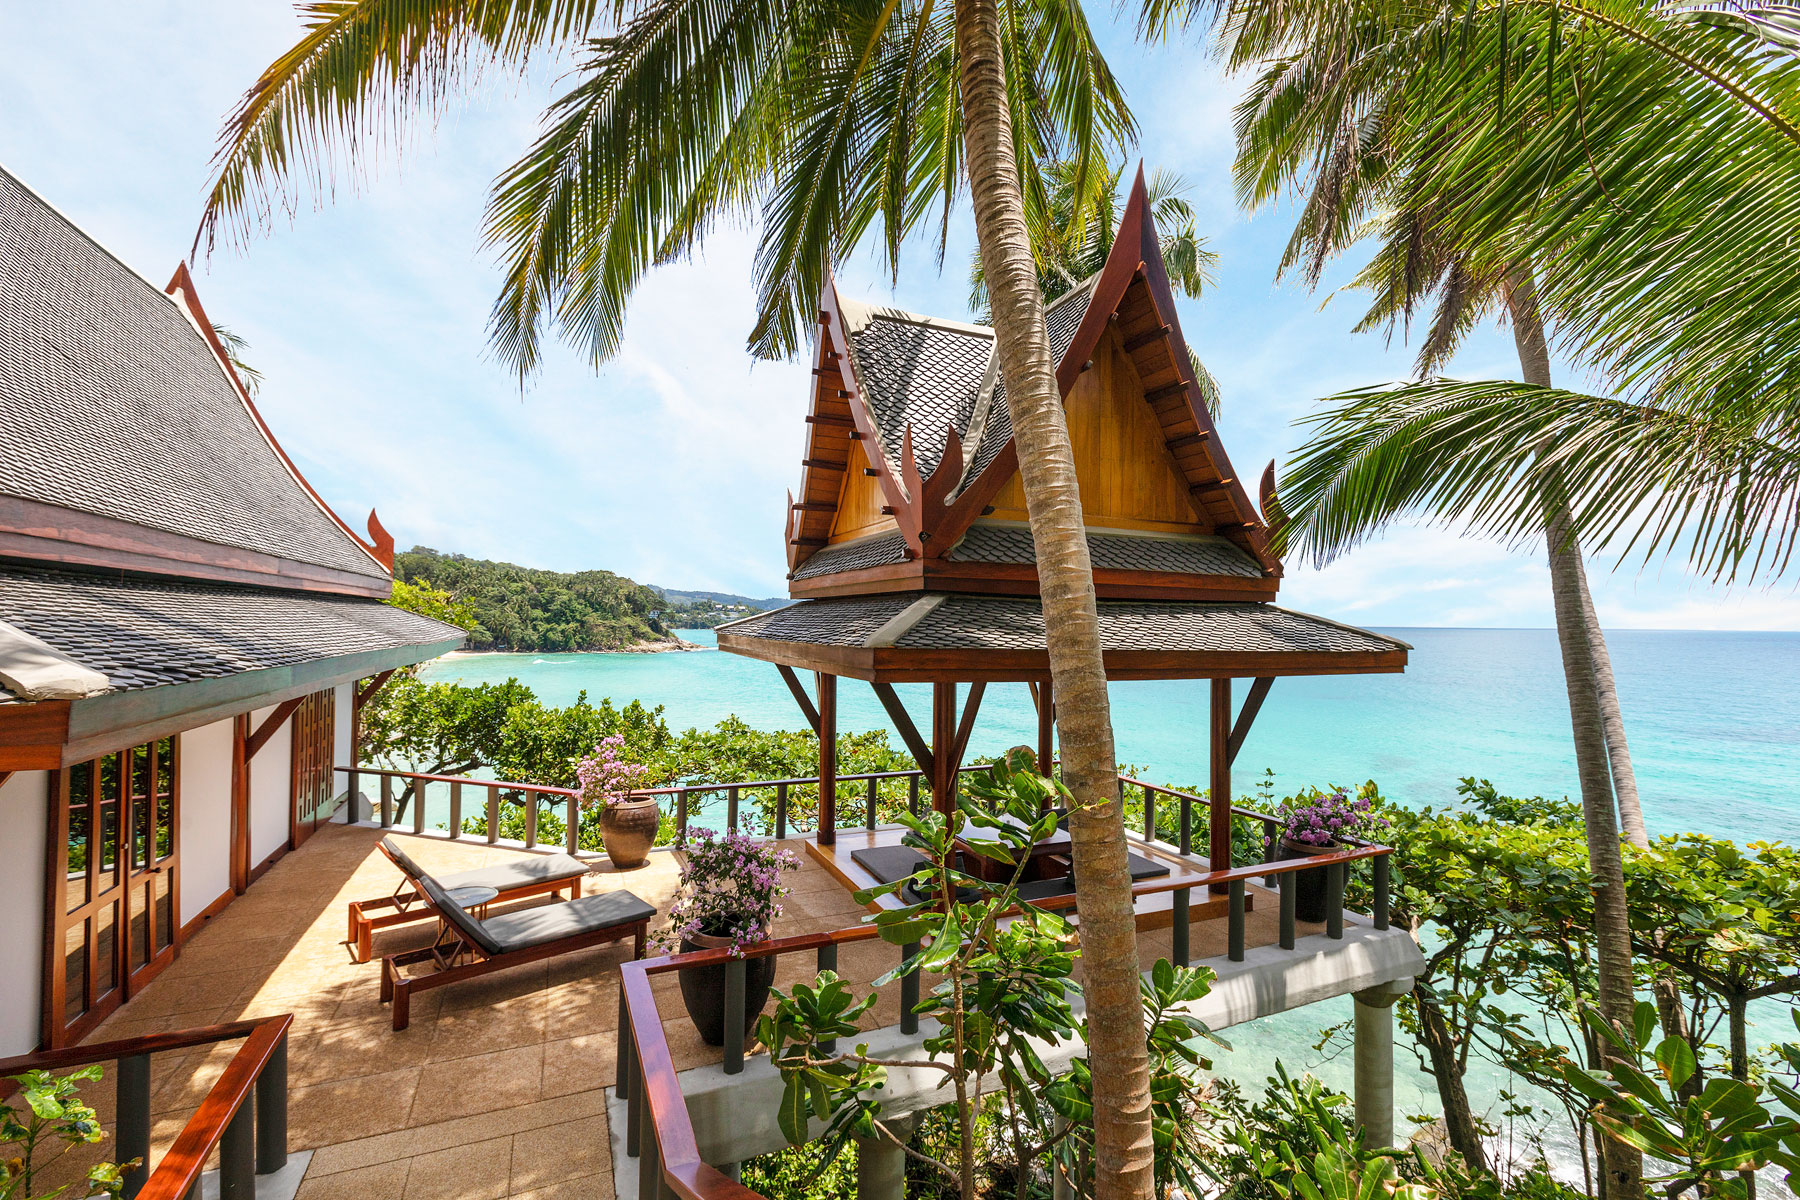 Amanpuri In Phuket, A Real-world Paradise Where You Can Find Peace